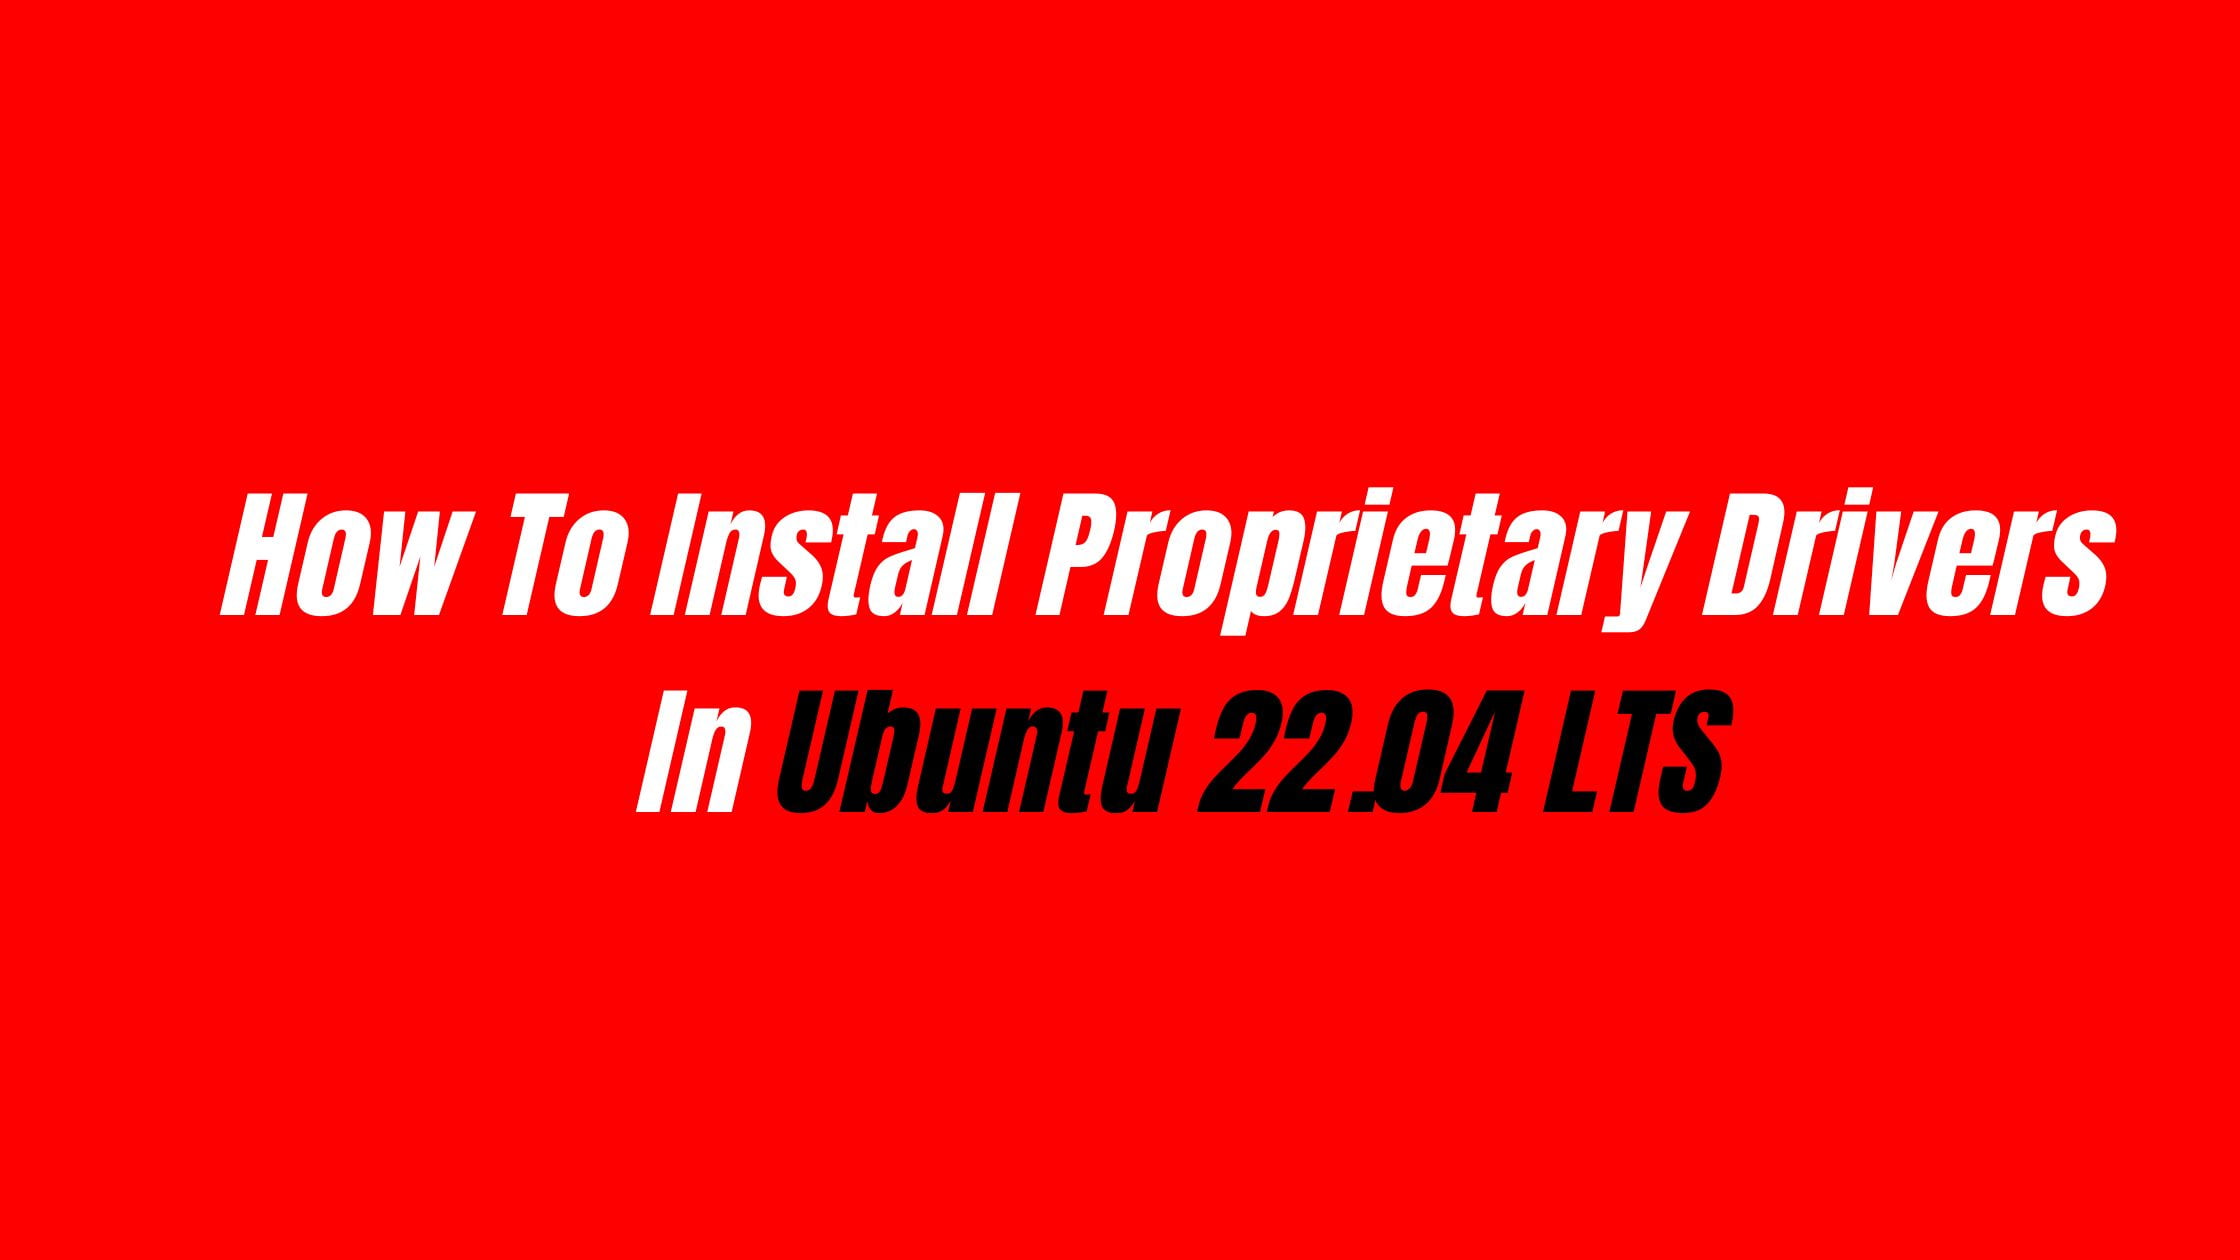 How To Install Proprietary Drivers In Ubuntu 22.04 LTS